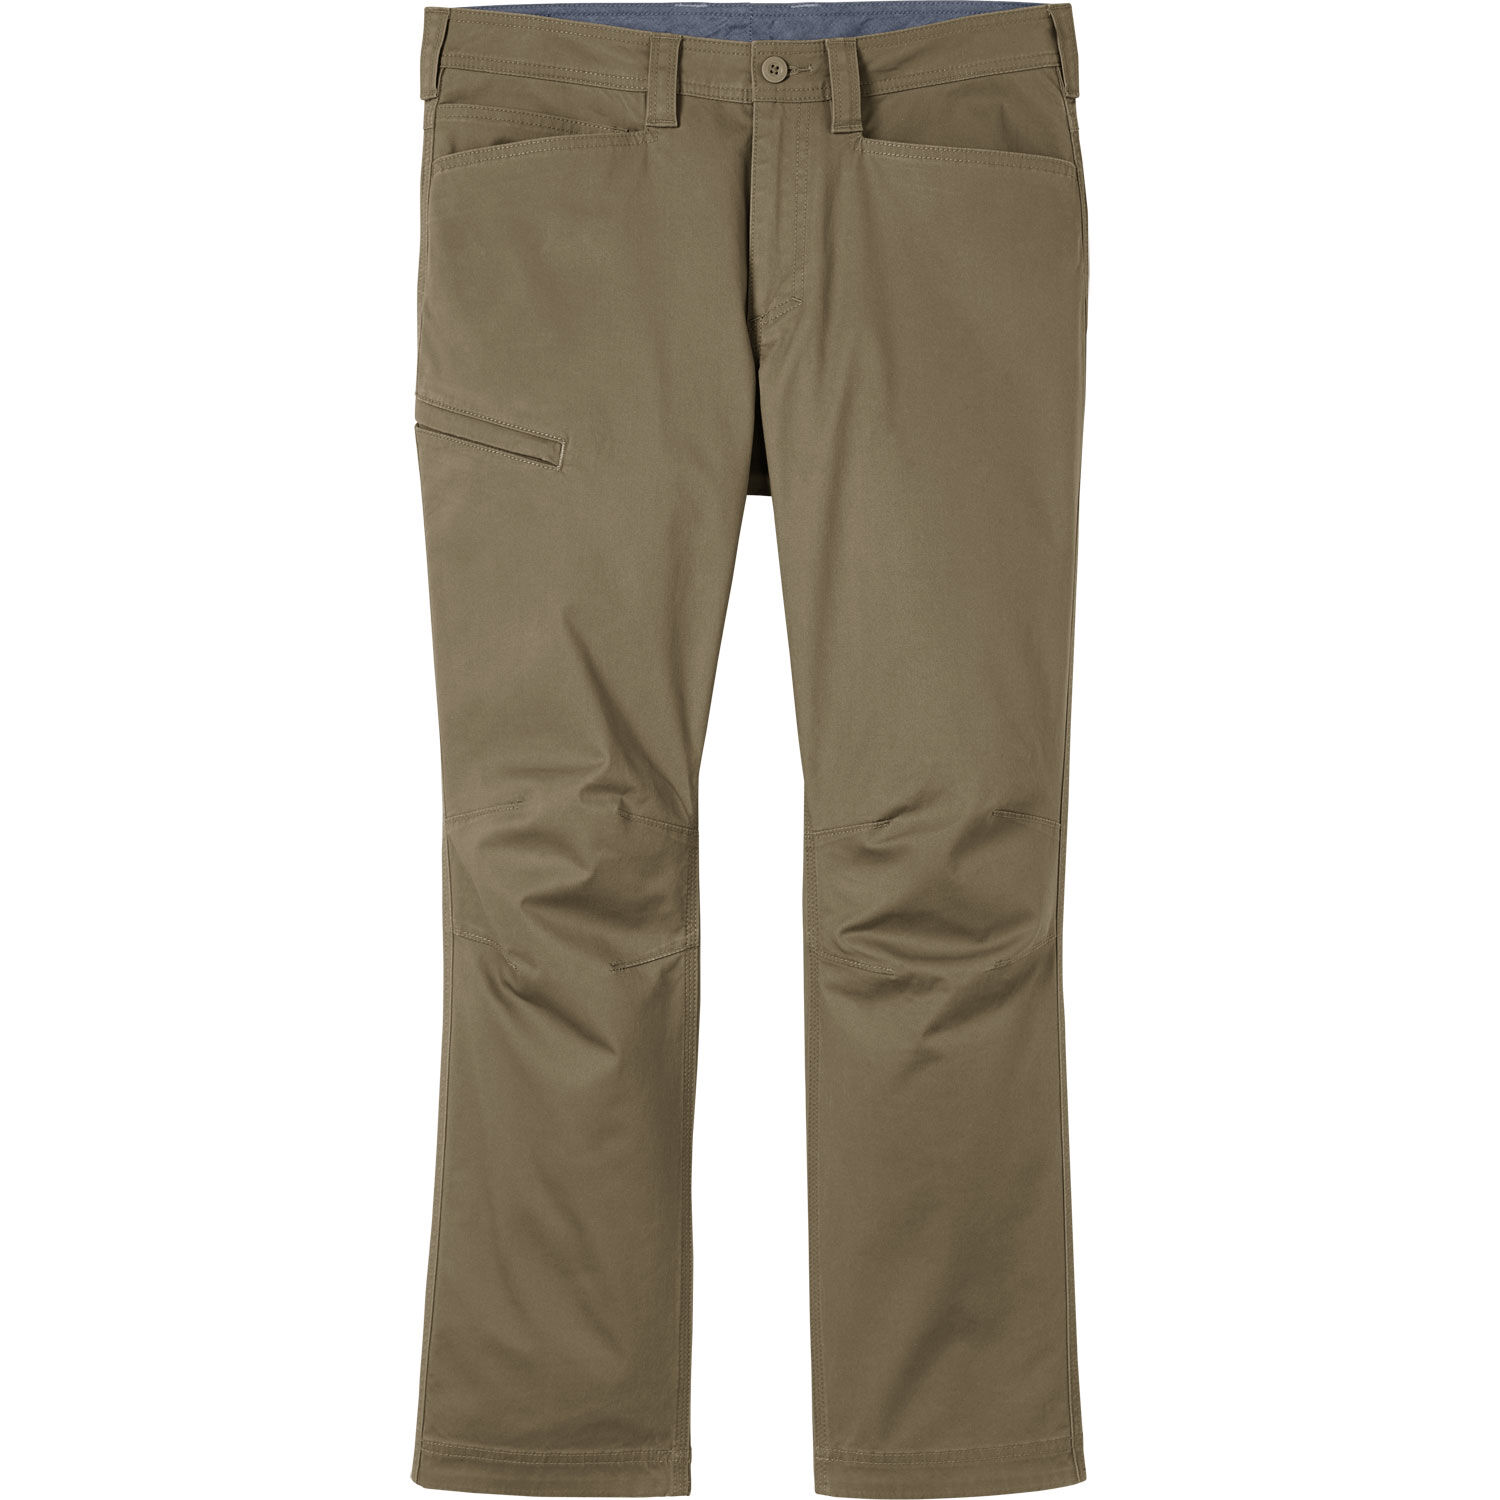 Men's Powercord Standard Fit Pants | Duluth Trading Company